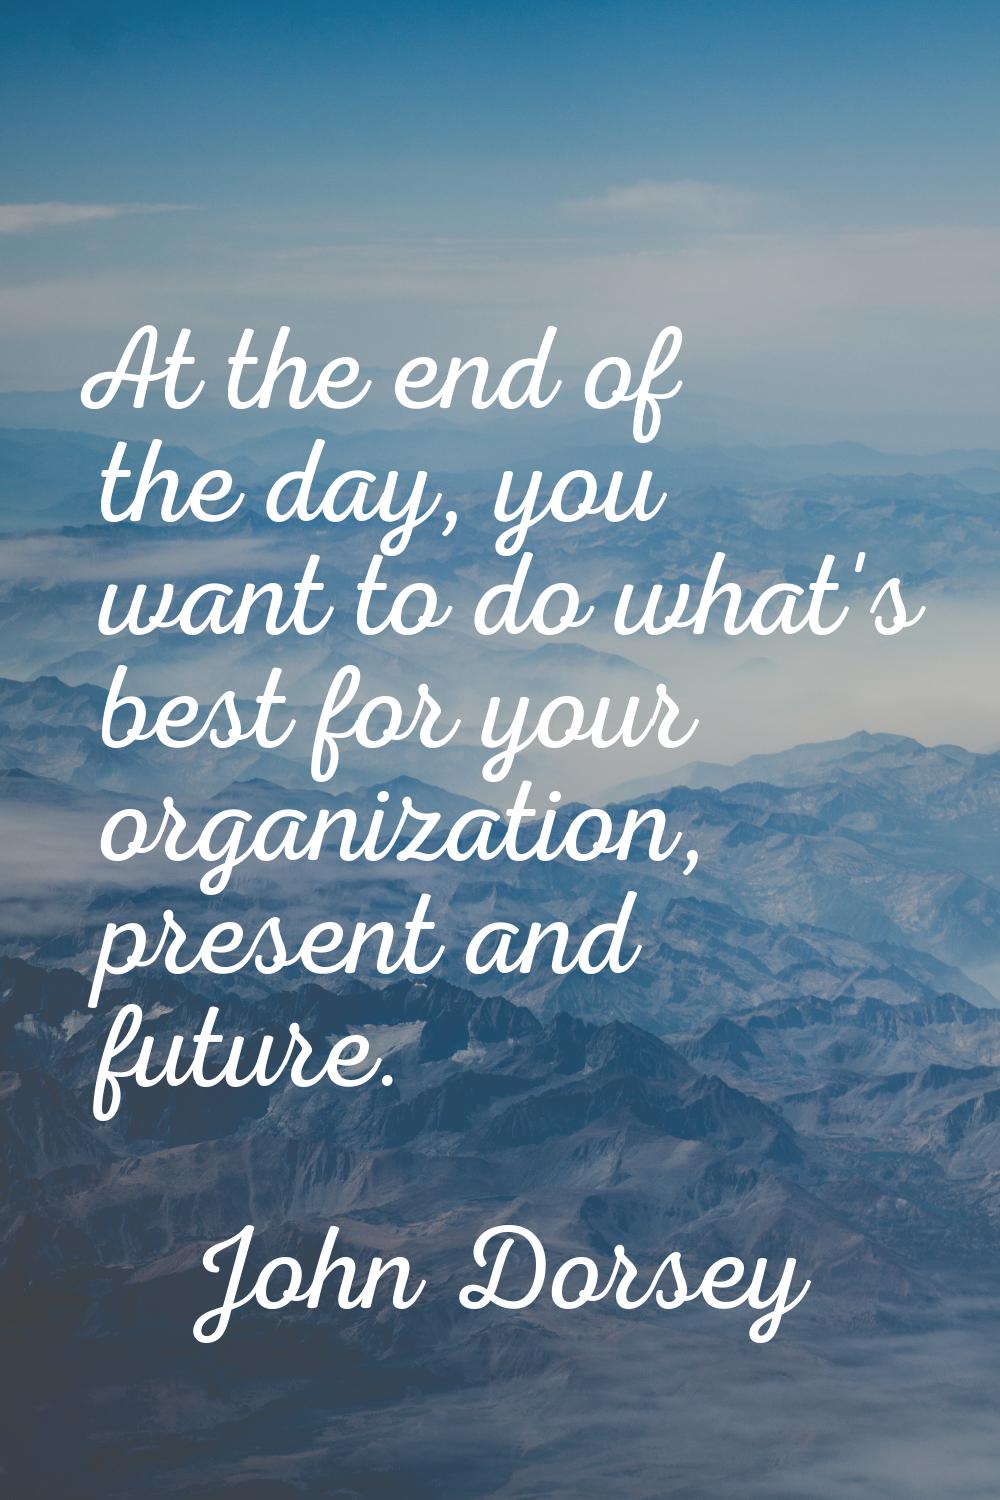 At the end of the day, you want to do what's best for your organization, present and future.